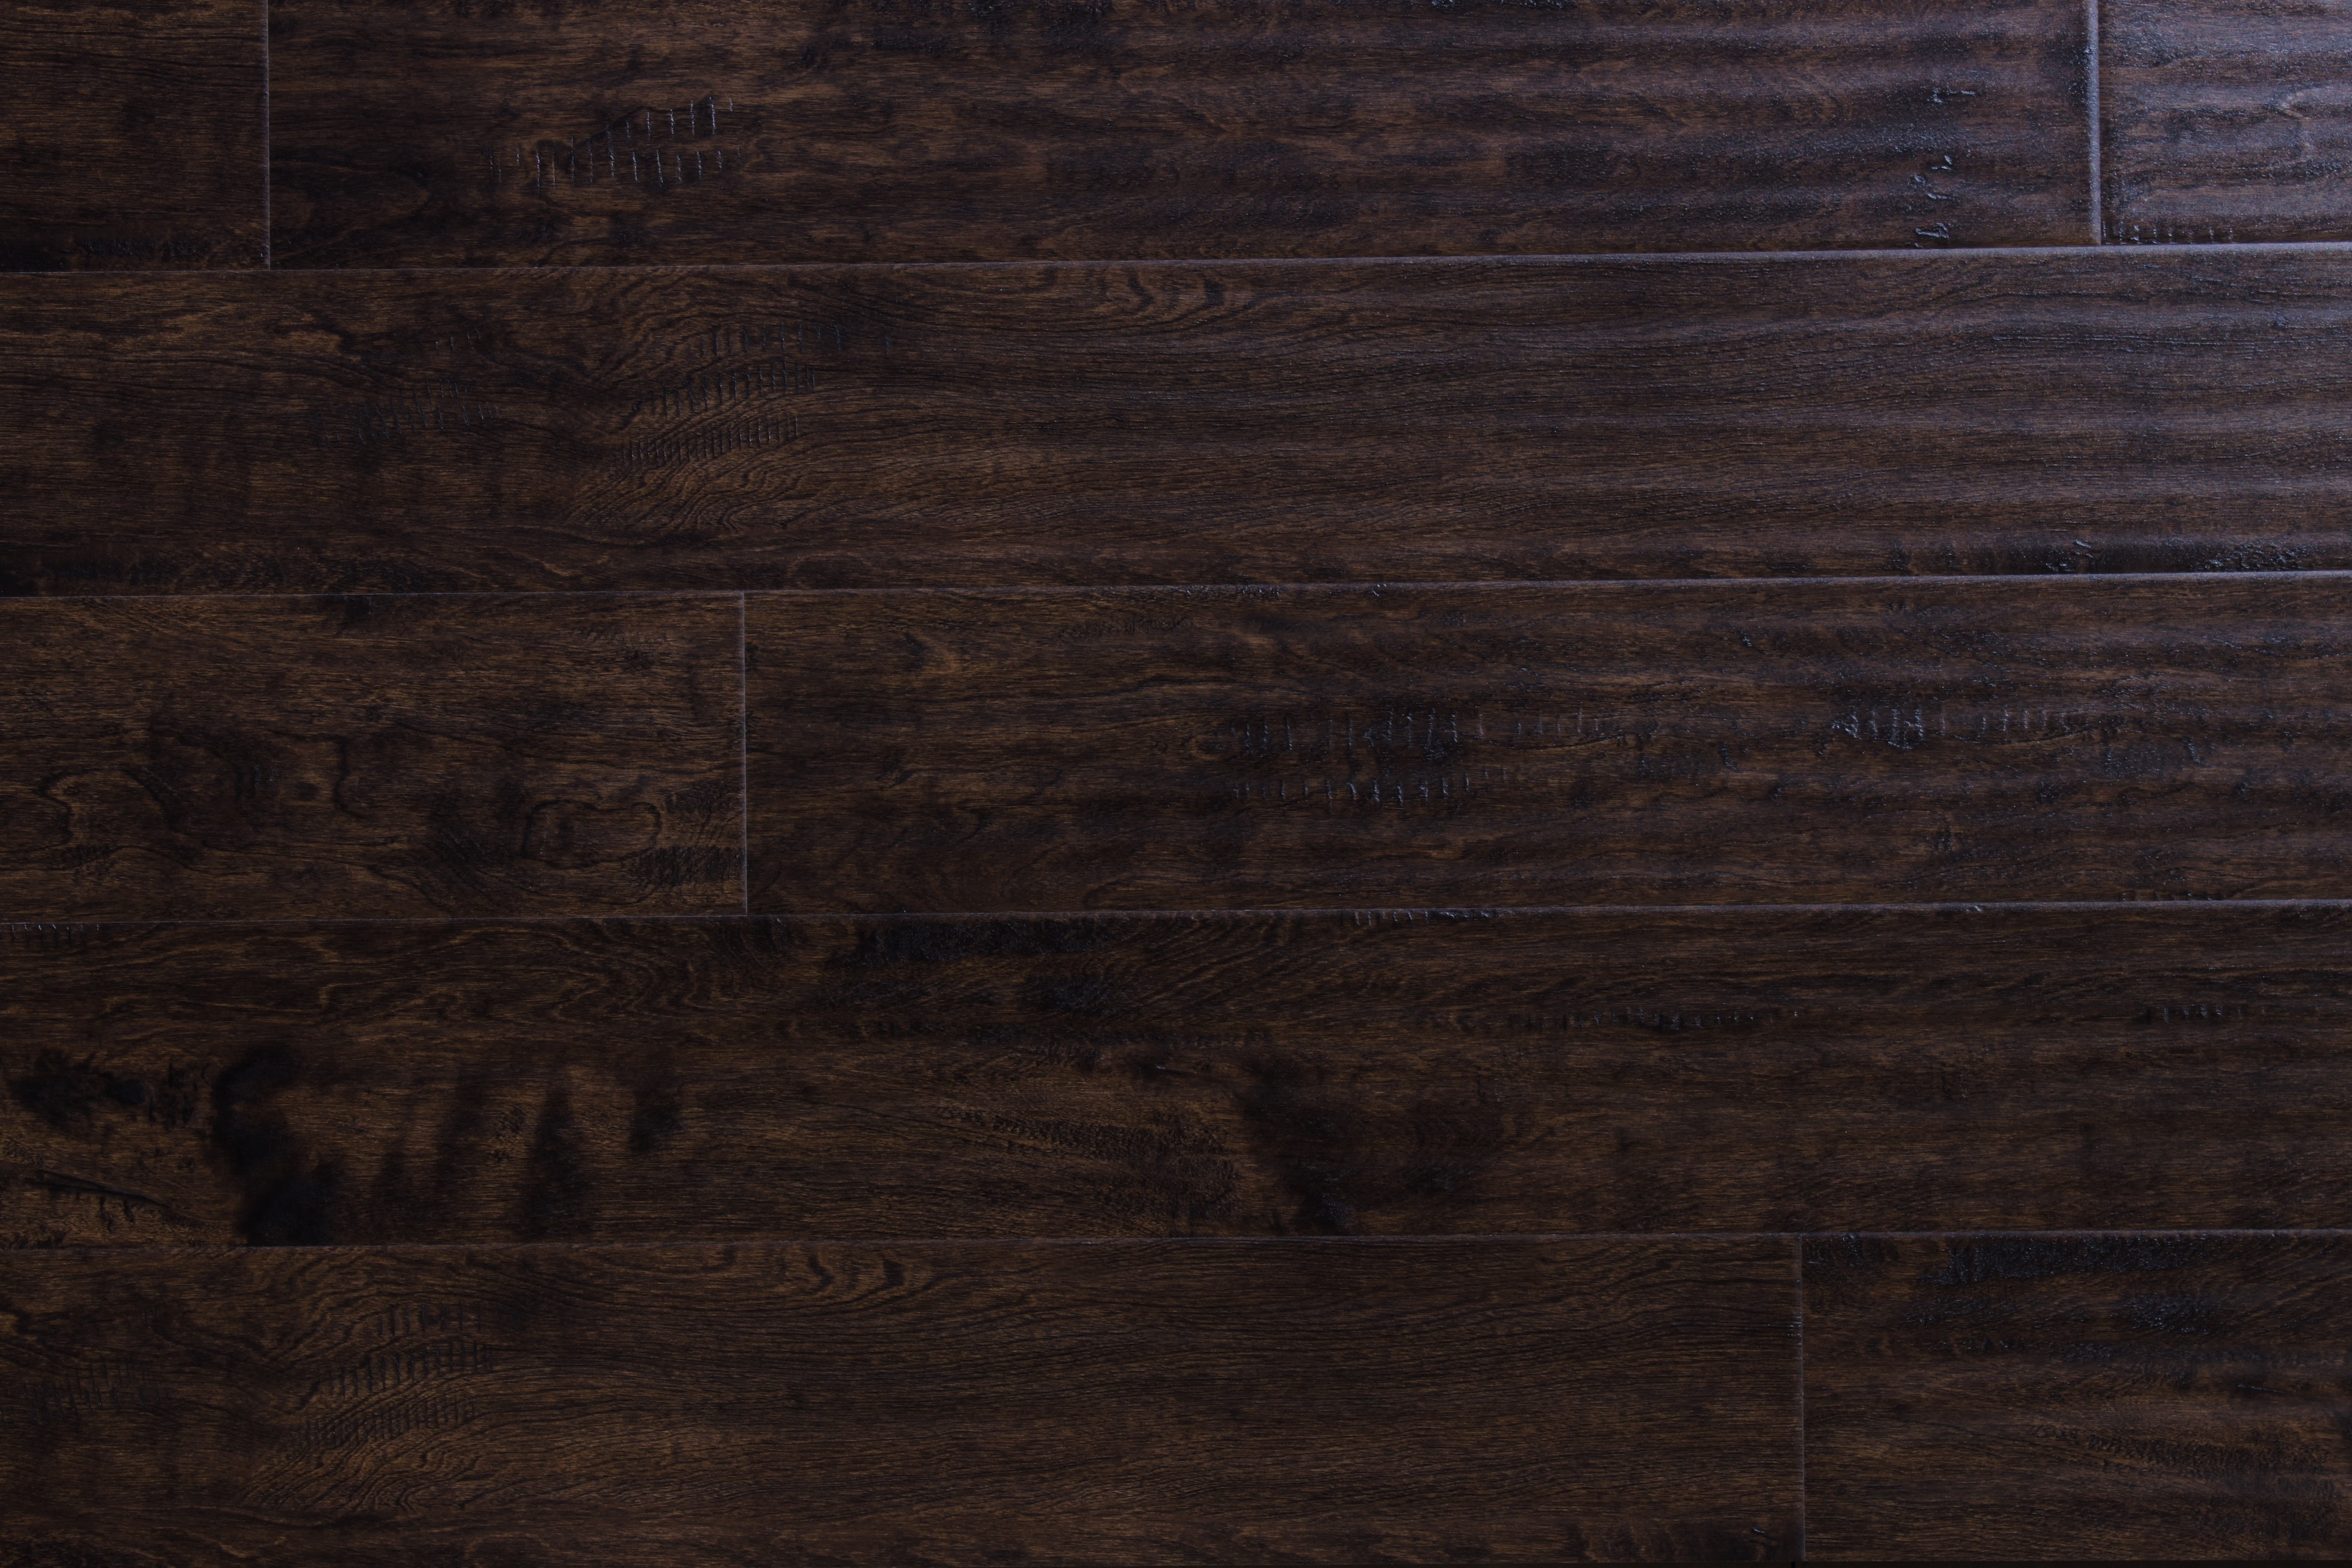 11 Stylish Wide Plank Hardwood Flooring 2024 free download wide plank hardwood flooring of wood flooring free samples available at builddirecta for tailor multi gb 5874277bb8d3c